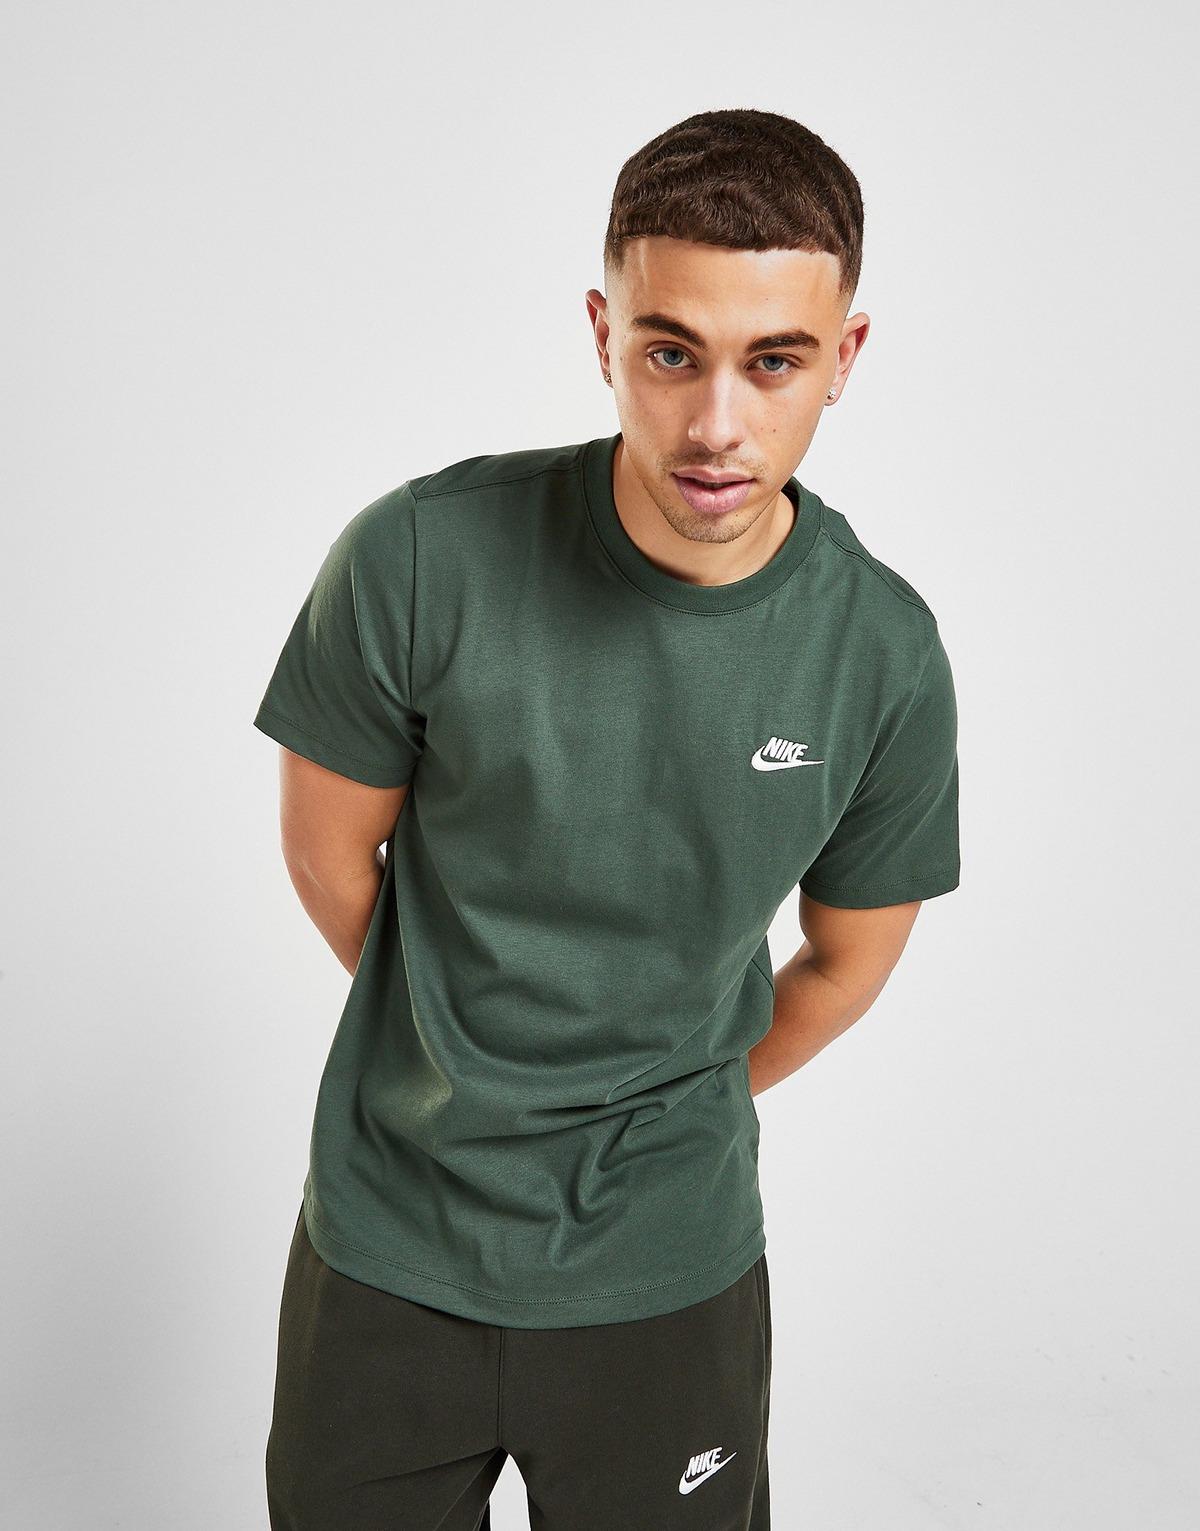 Nike Cotton Core T-shirt in Green for Men - Lyst